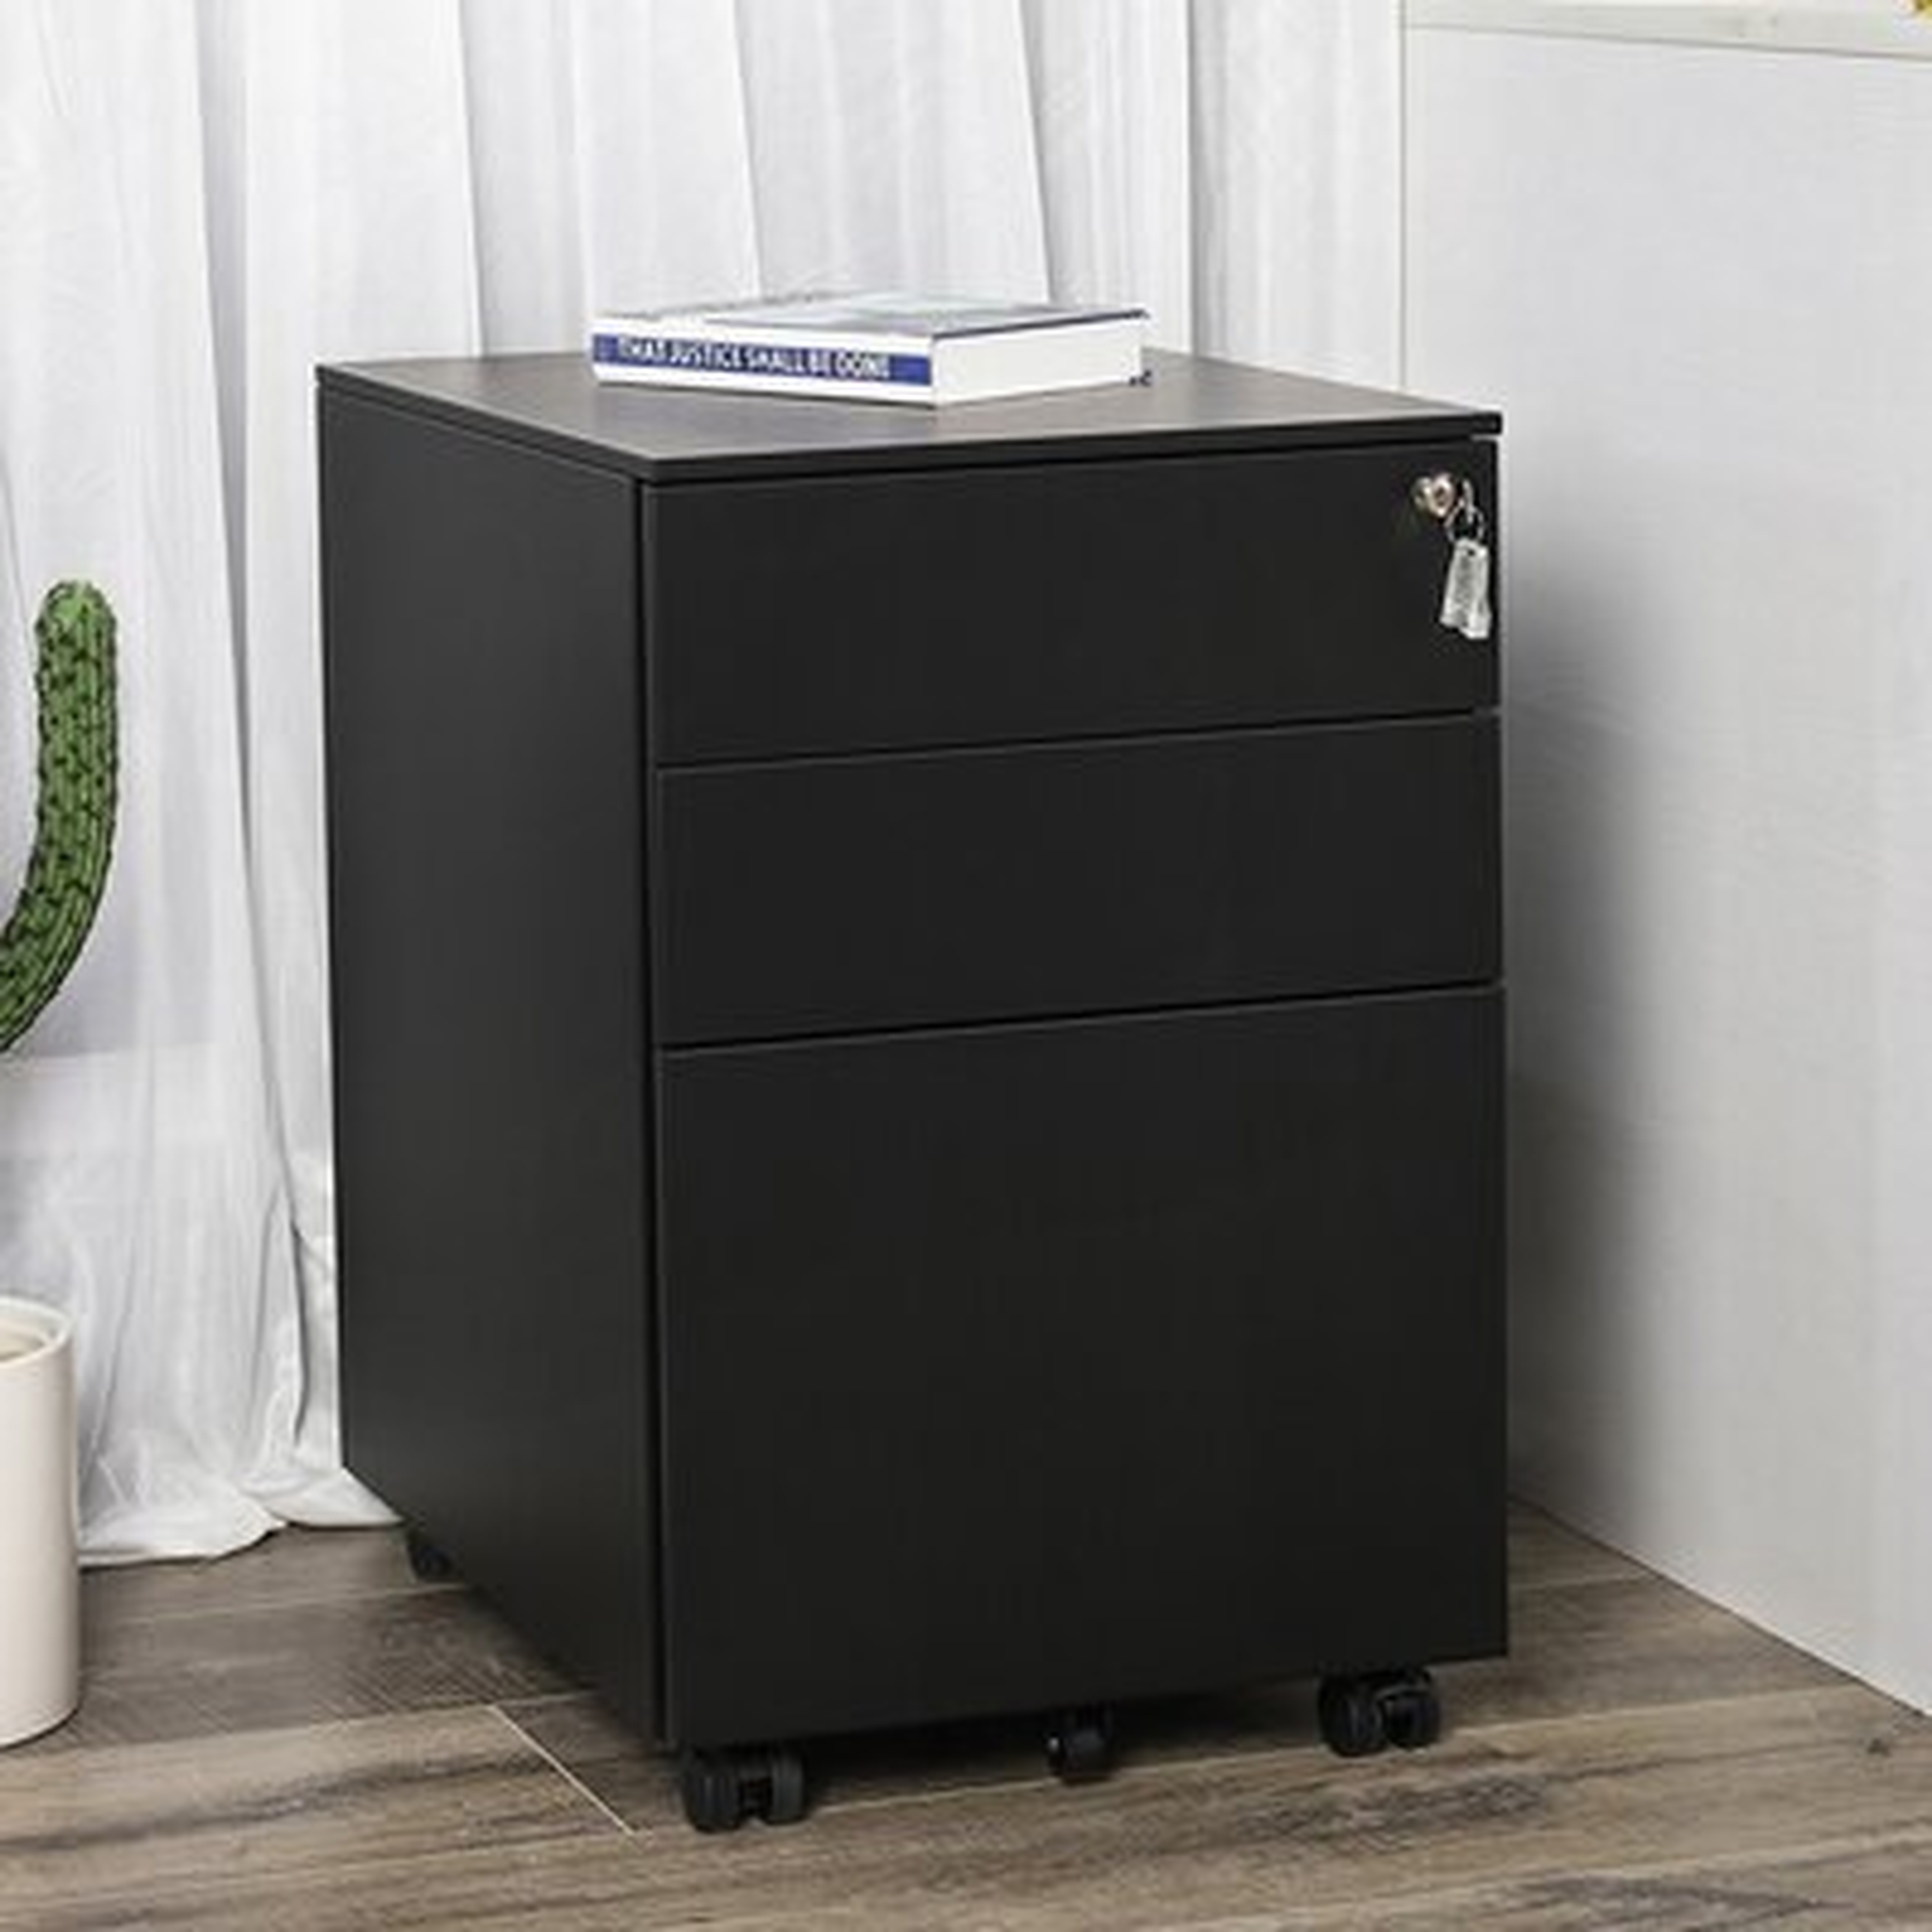 Sidwell Steel 3-Drawer Mobile Vertical Filing Cabinet - Wayfair